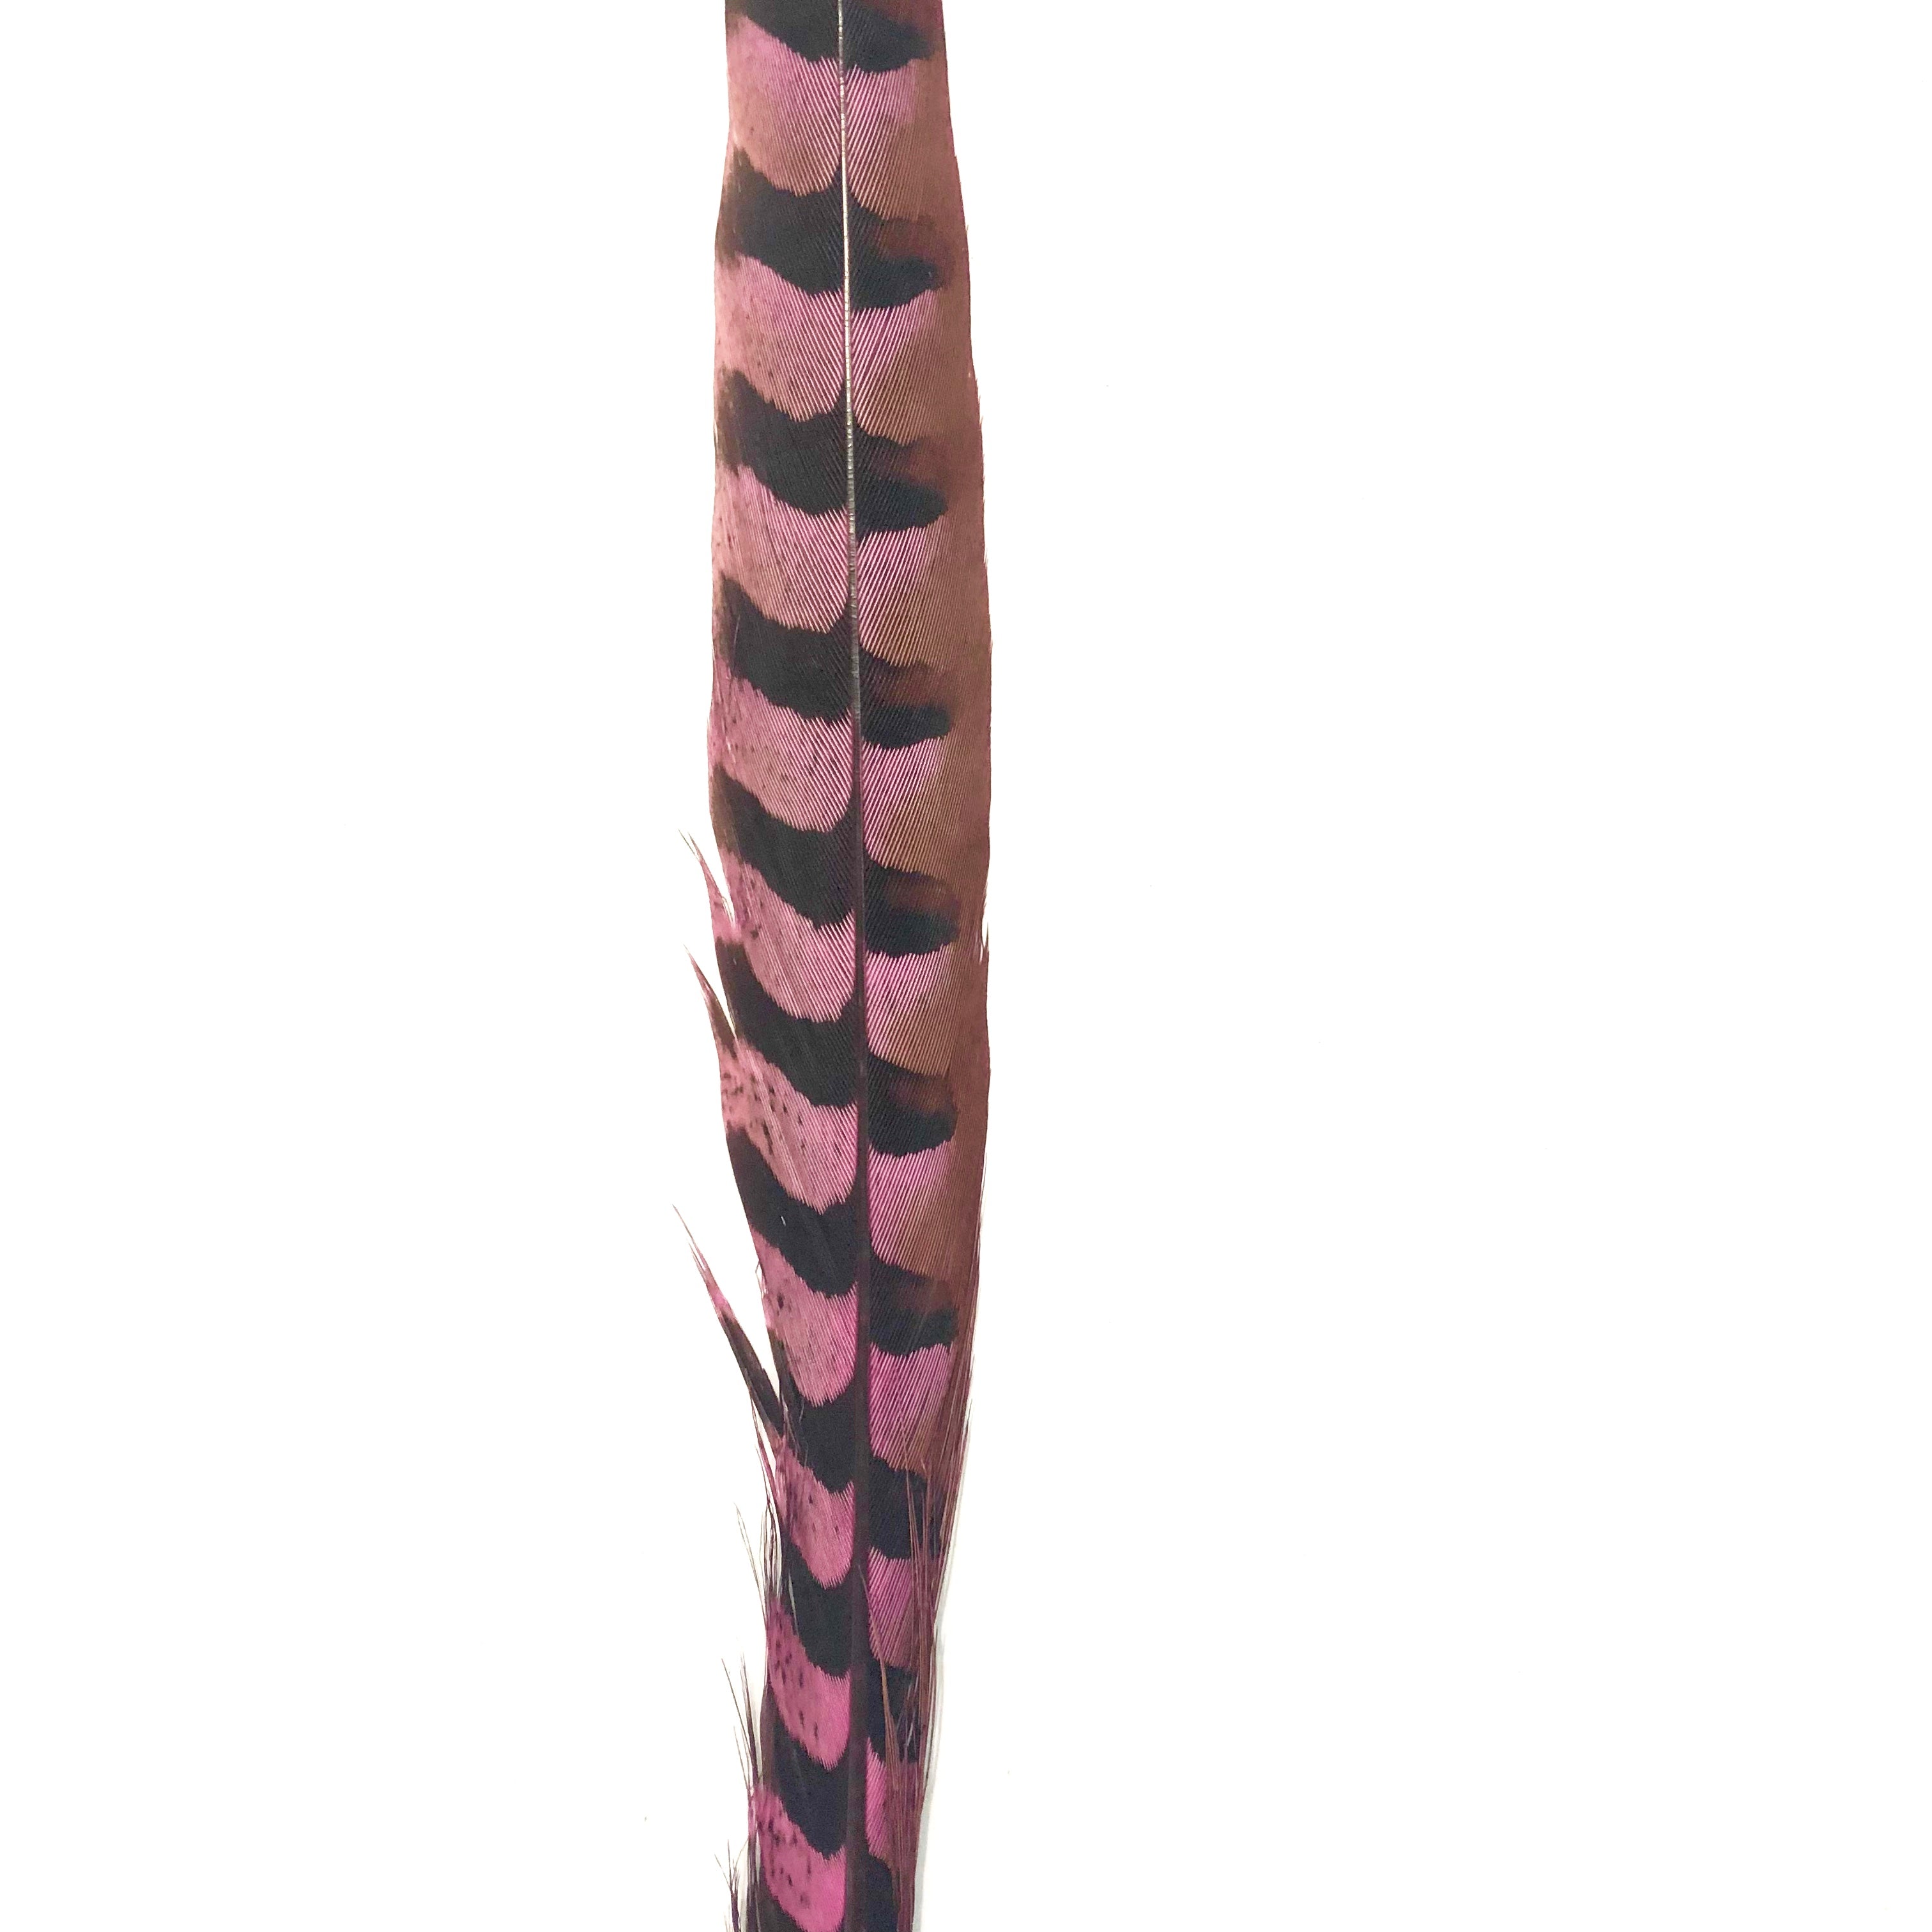 30" to 32" Reeves Pheasant Tail Feather - Hot Pink